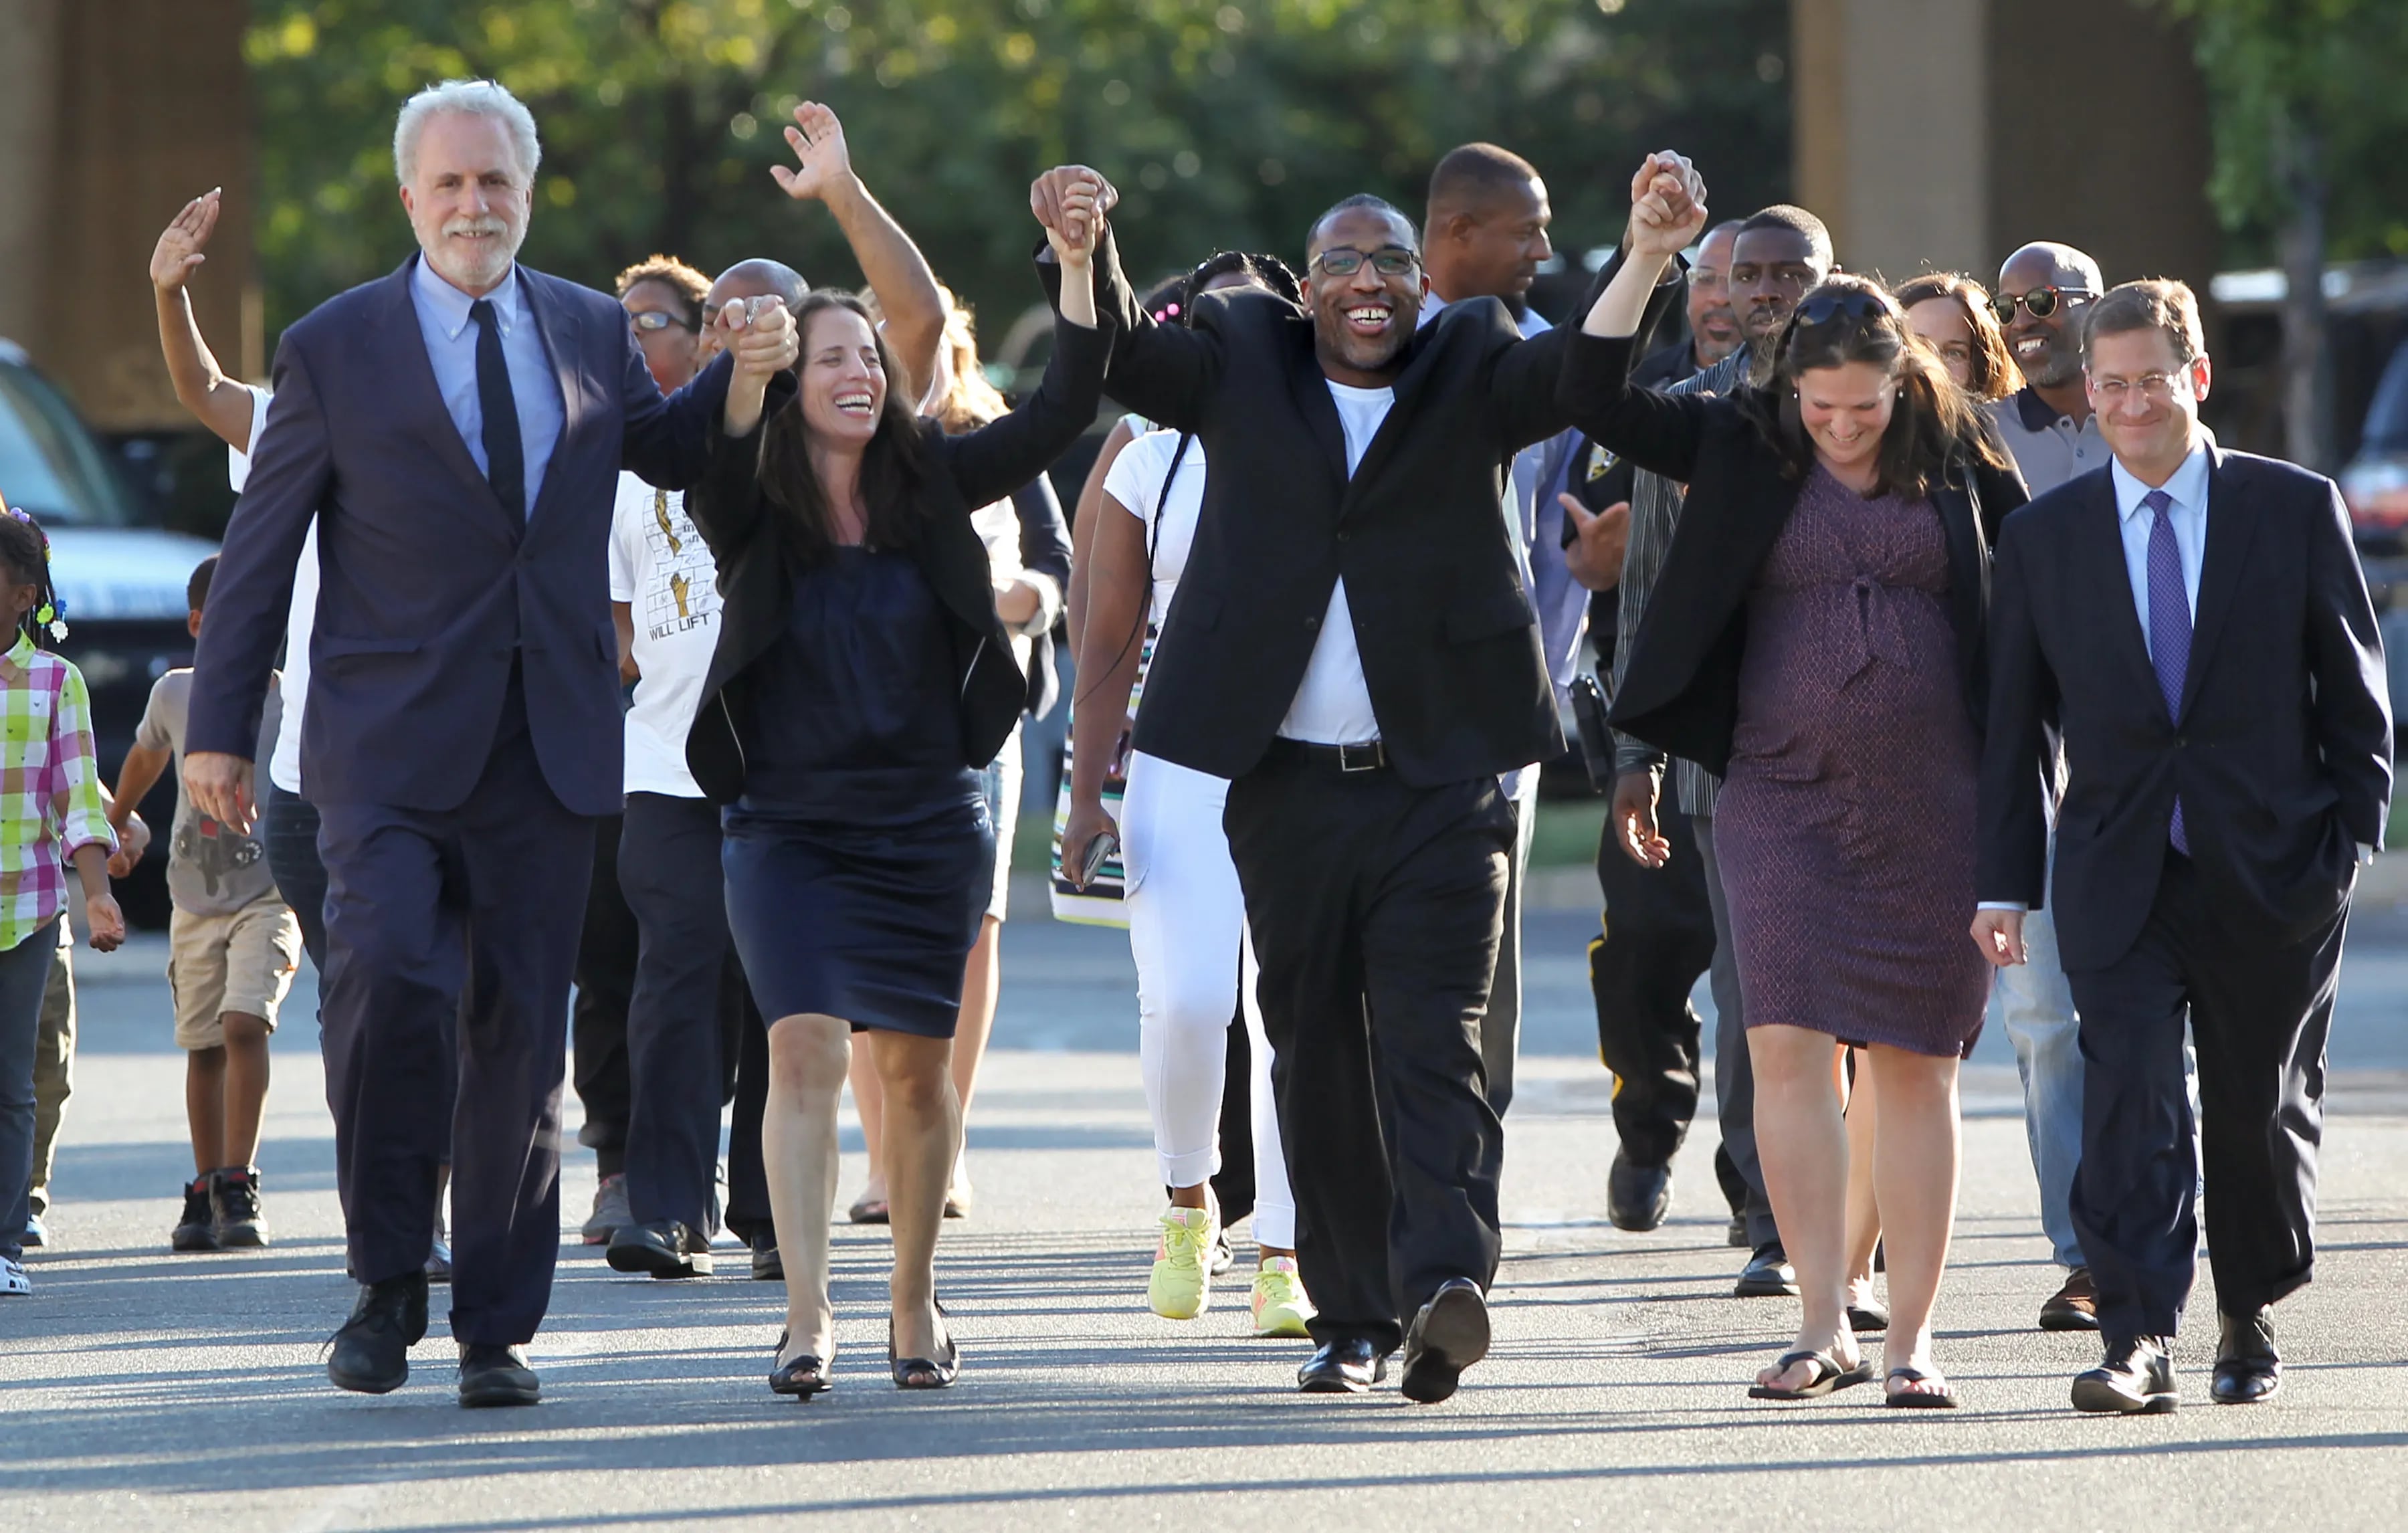 THE CASE THAT COLLAPSED Anthony Wright (center) walks out of a Philadelphia jail in 2016 after being acquitted at his retrial for a 1991 murder. With him are his lawyers (from left), Peter Neufeld, Nina Morrison, Rebecca Lacher, and Sam Silver.